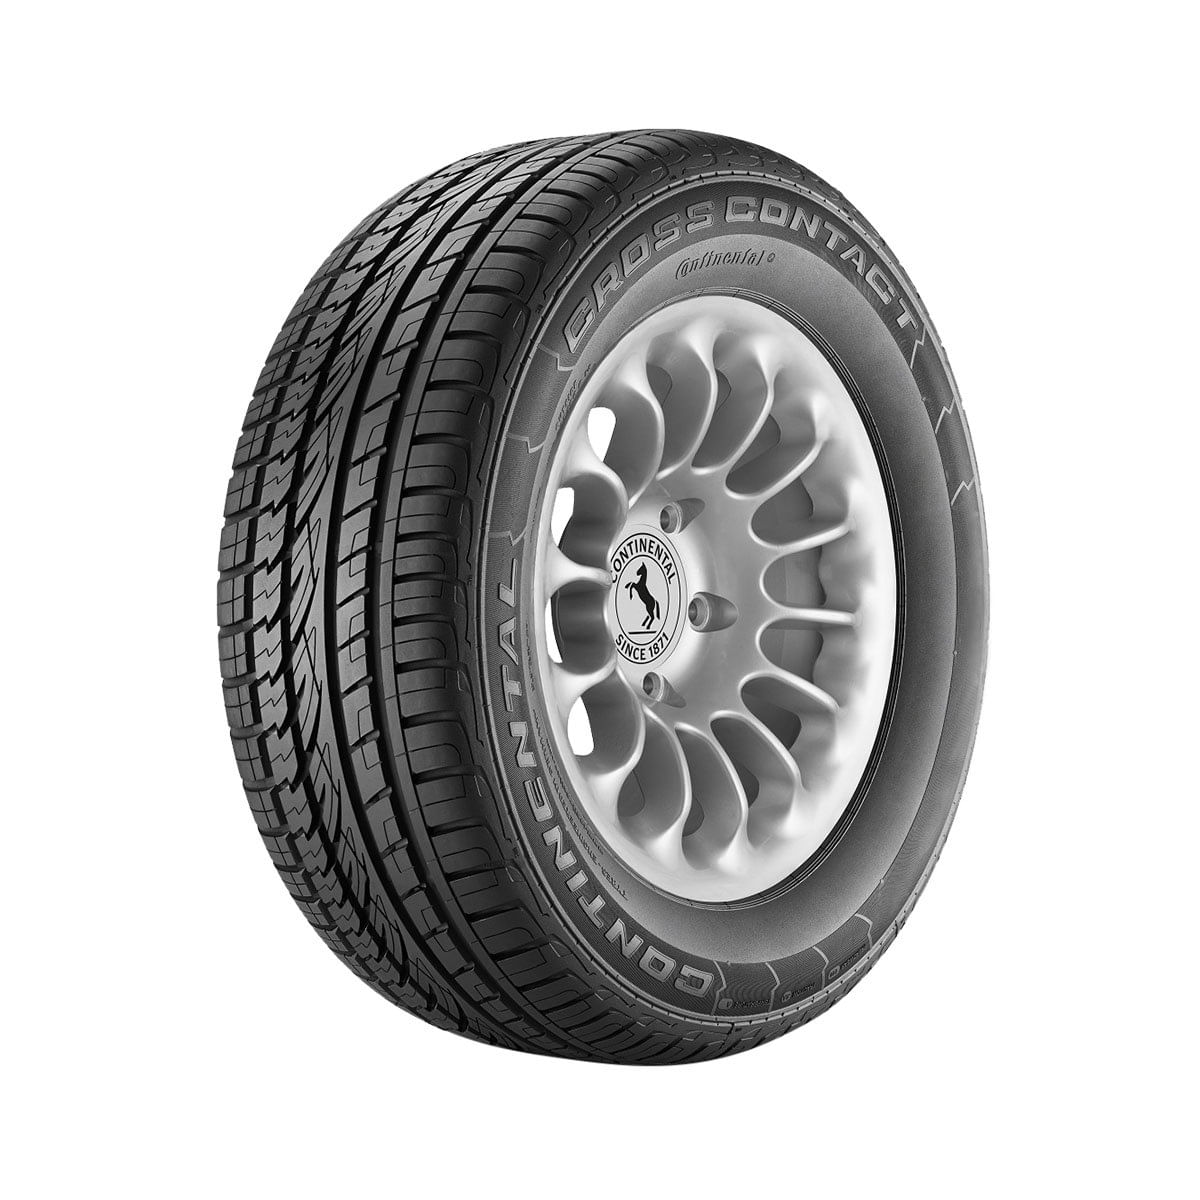 5745144_Pneu Aro 20 255/50 R 20 Continental CrossContact UHP 3548590000_1_Zoom